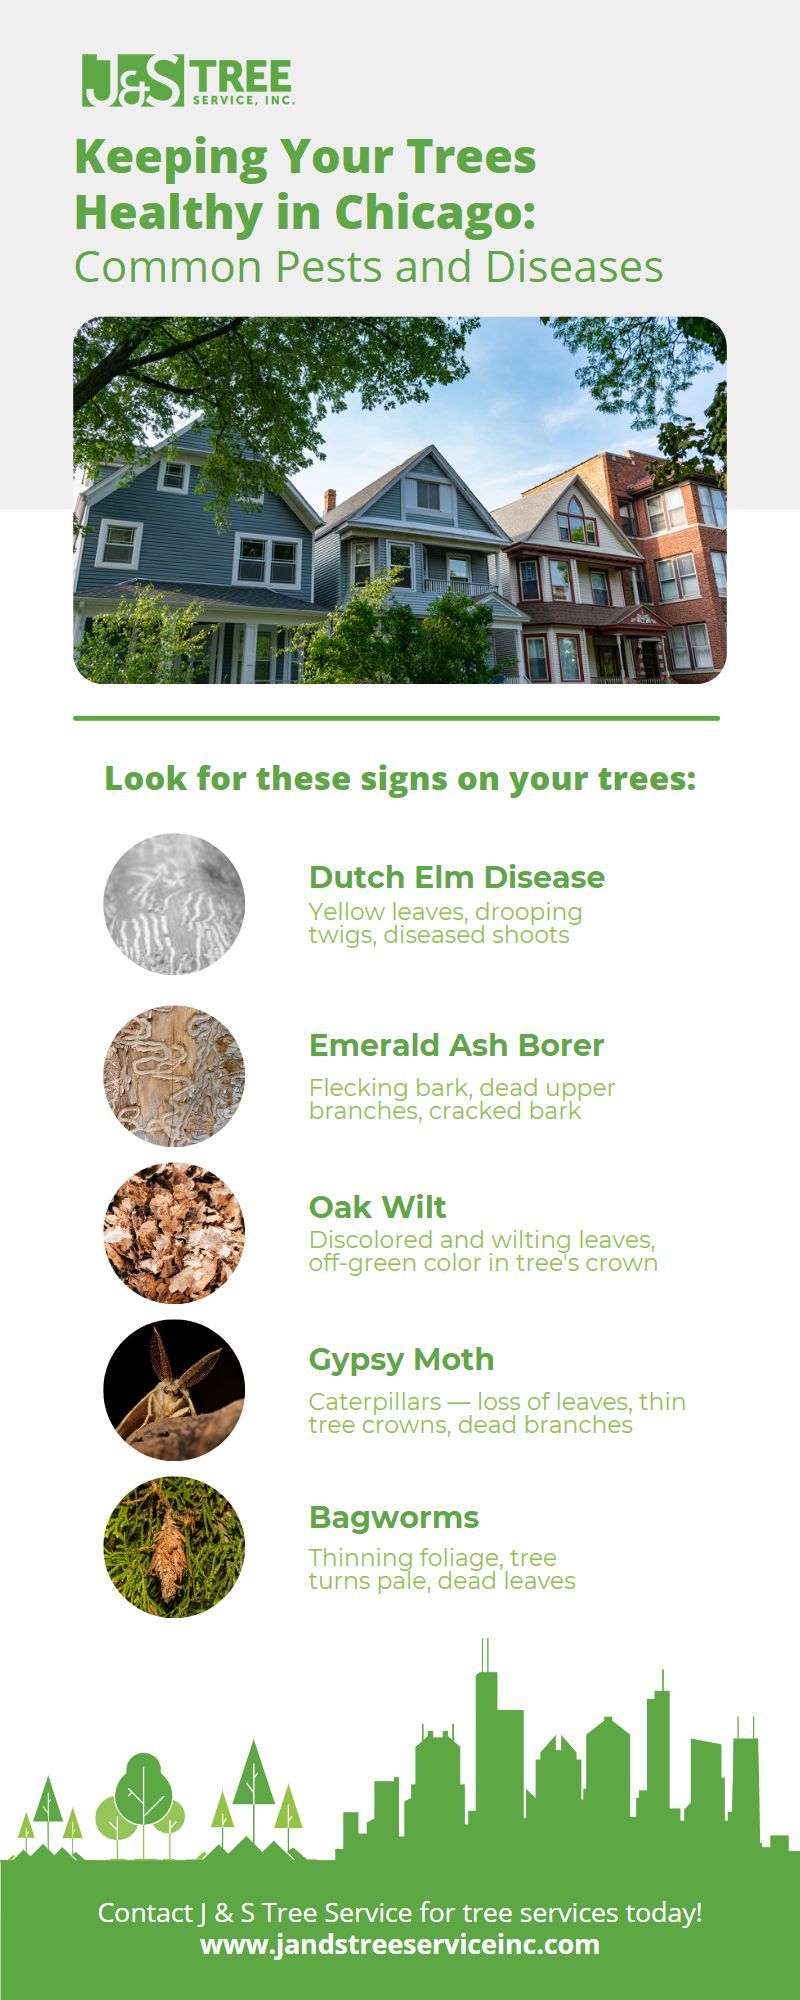 M11335 - J & S Tree Service infographic Keeping Your Trees Healthy in Chicago Common Pests and Diseases.jpg